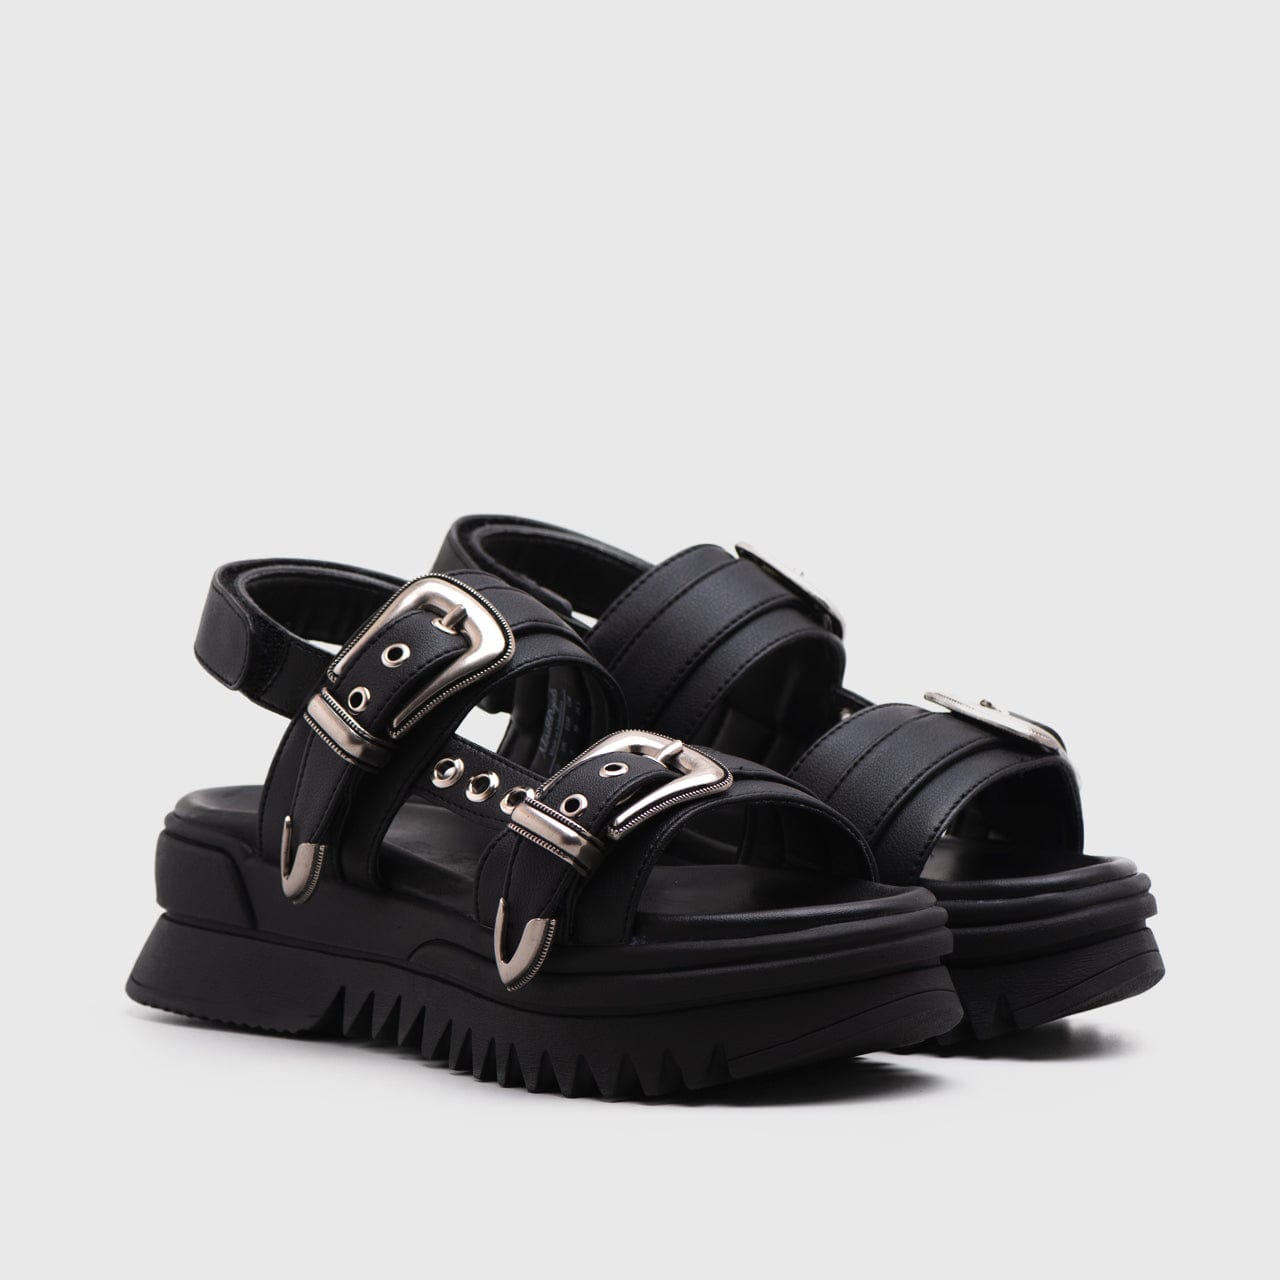 Adorable Projects Official 37 Adorableprojects - Bowline Sandals Black - Sendal Wanita